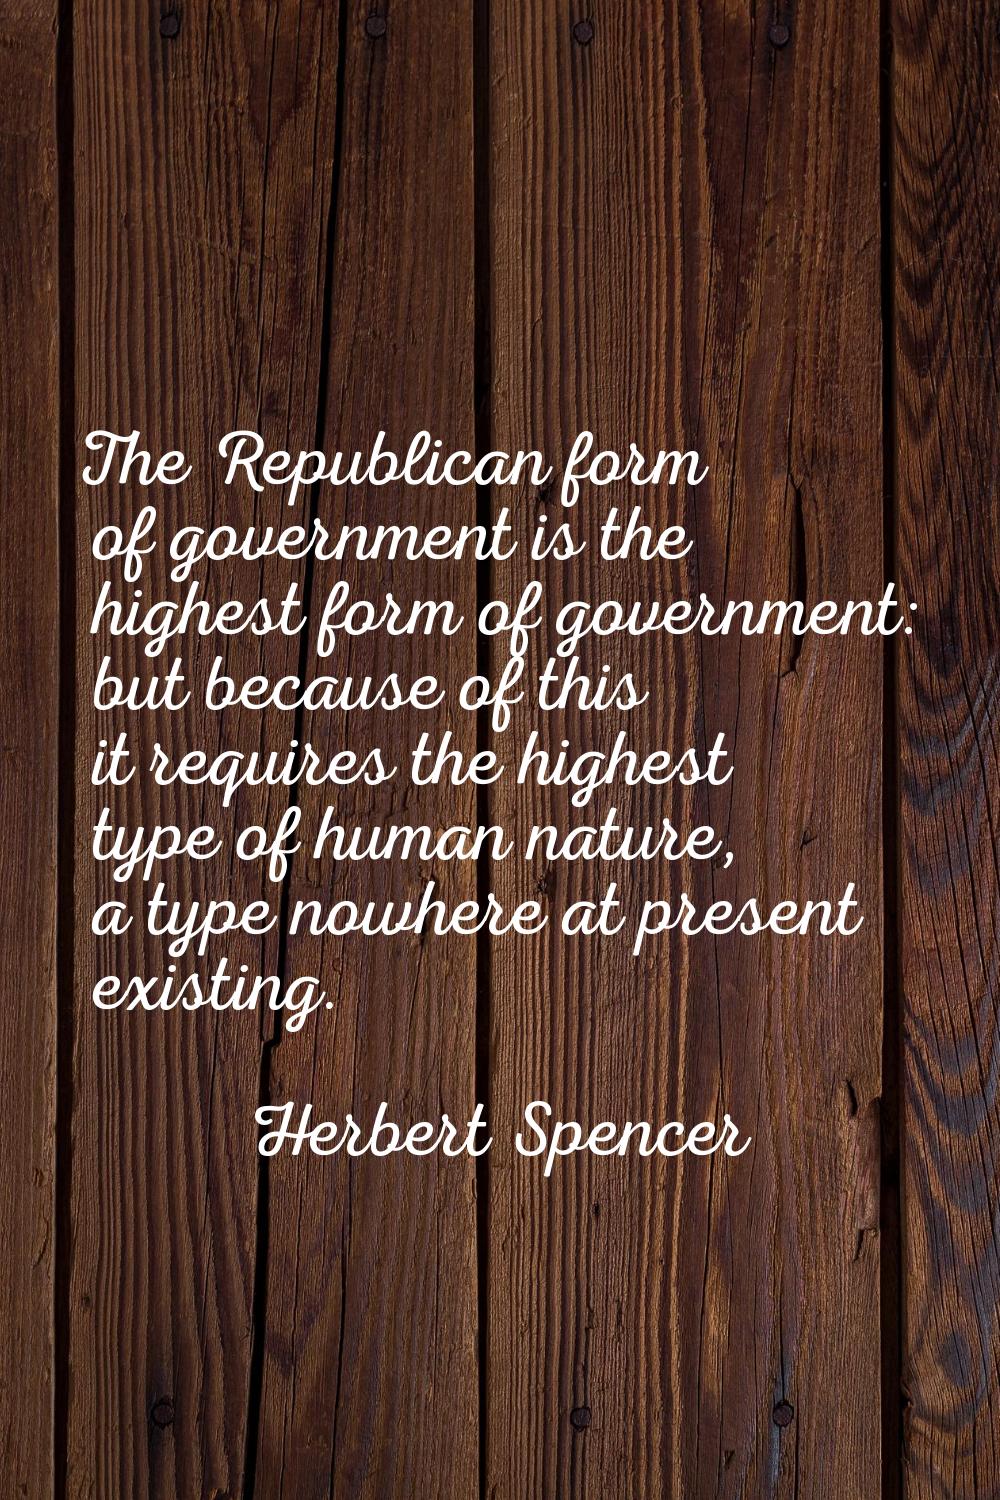 The Republican form of government is the highest form of government: but because of this it require